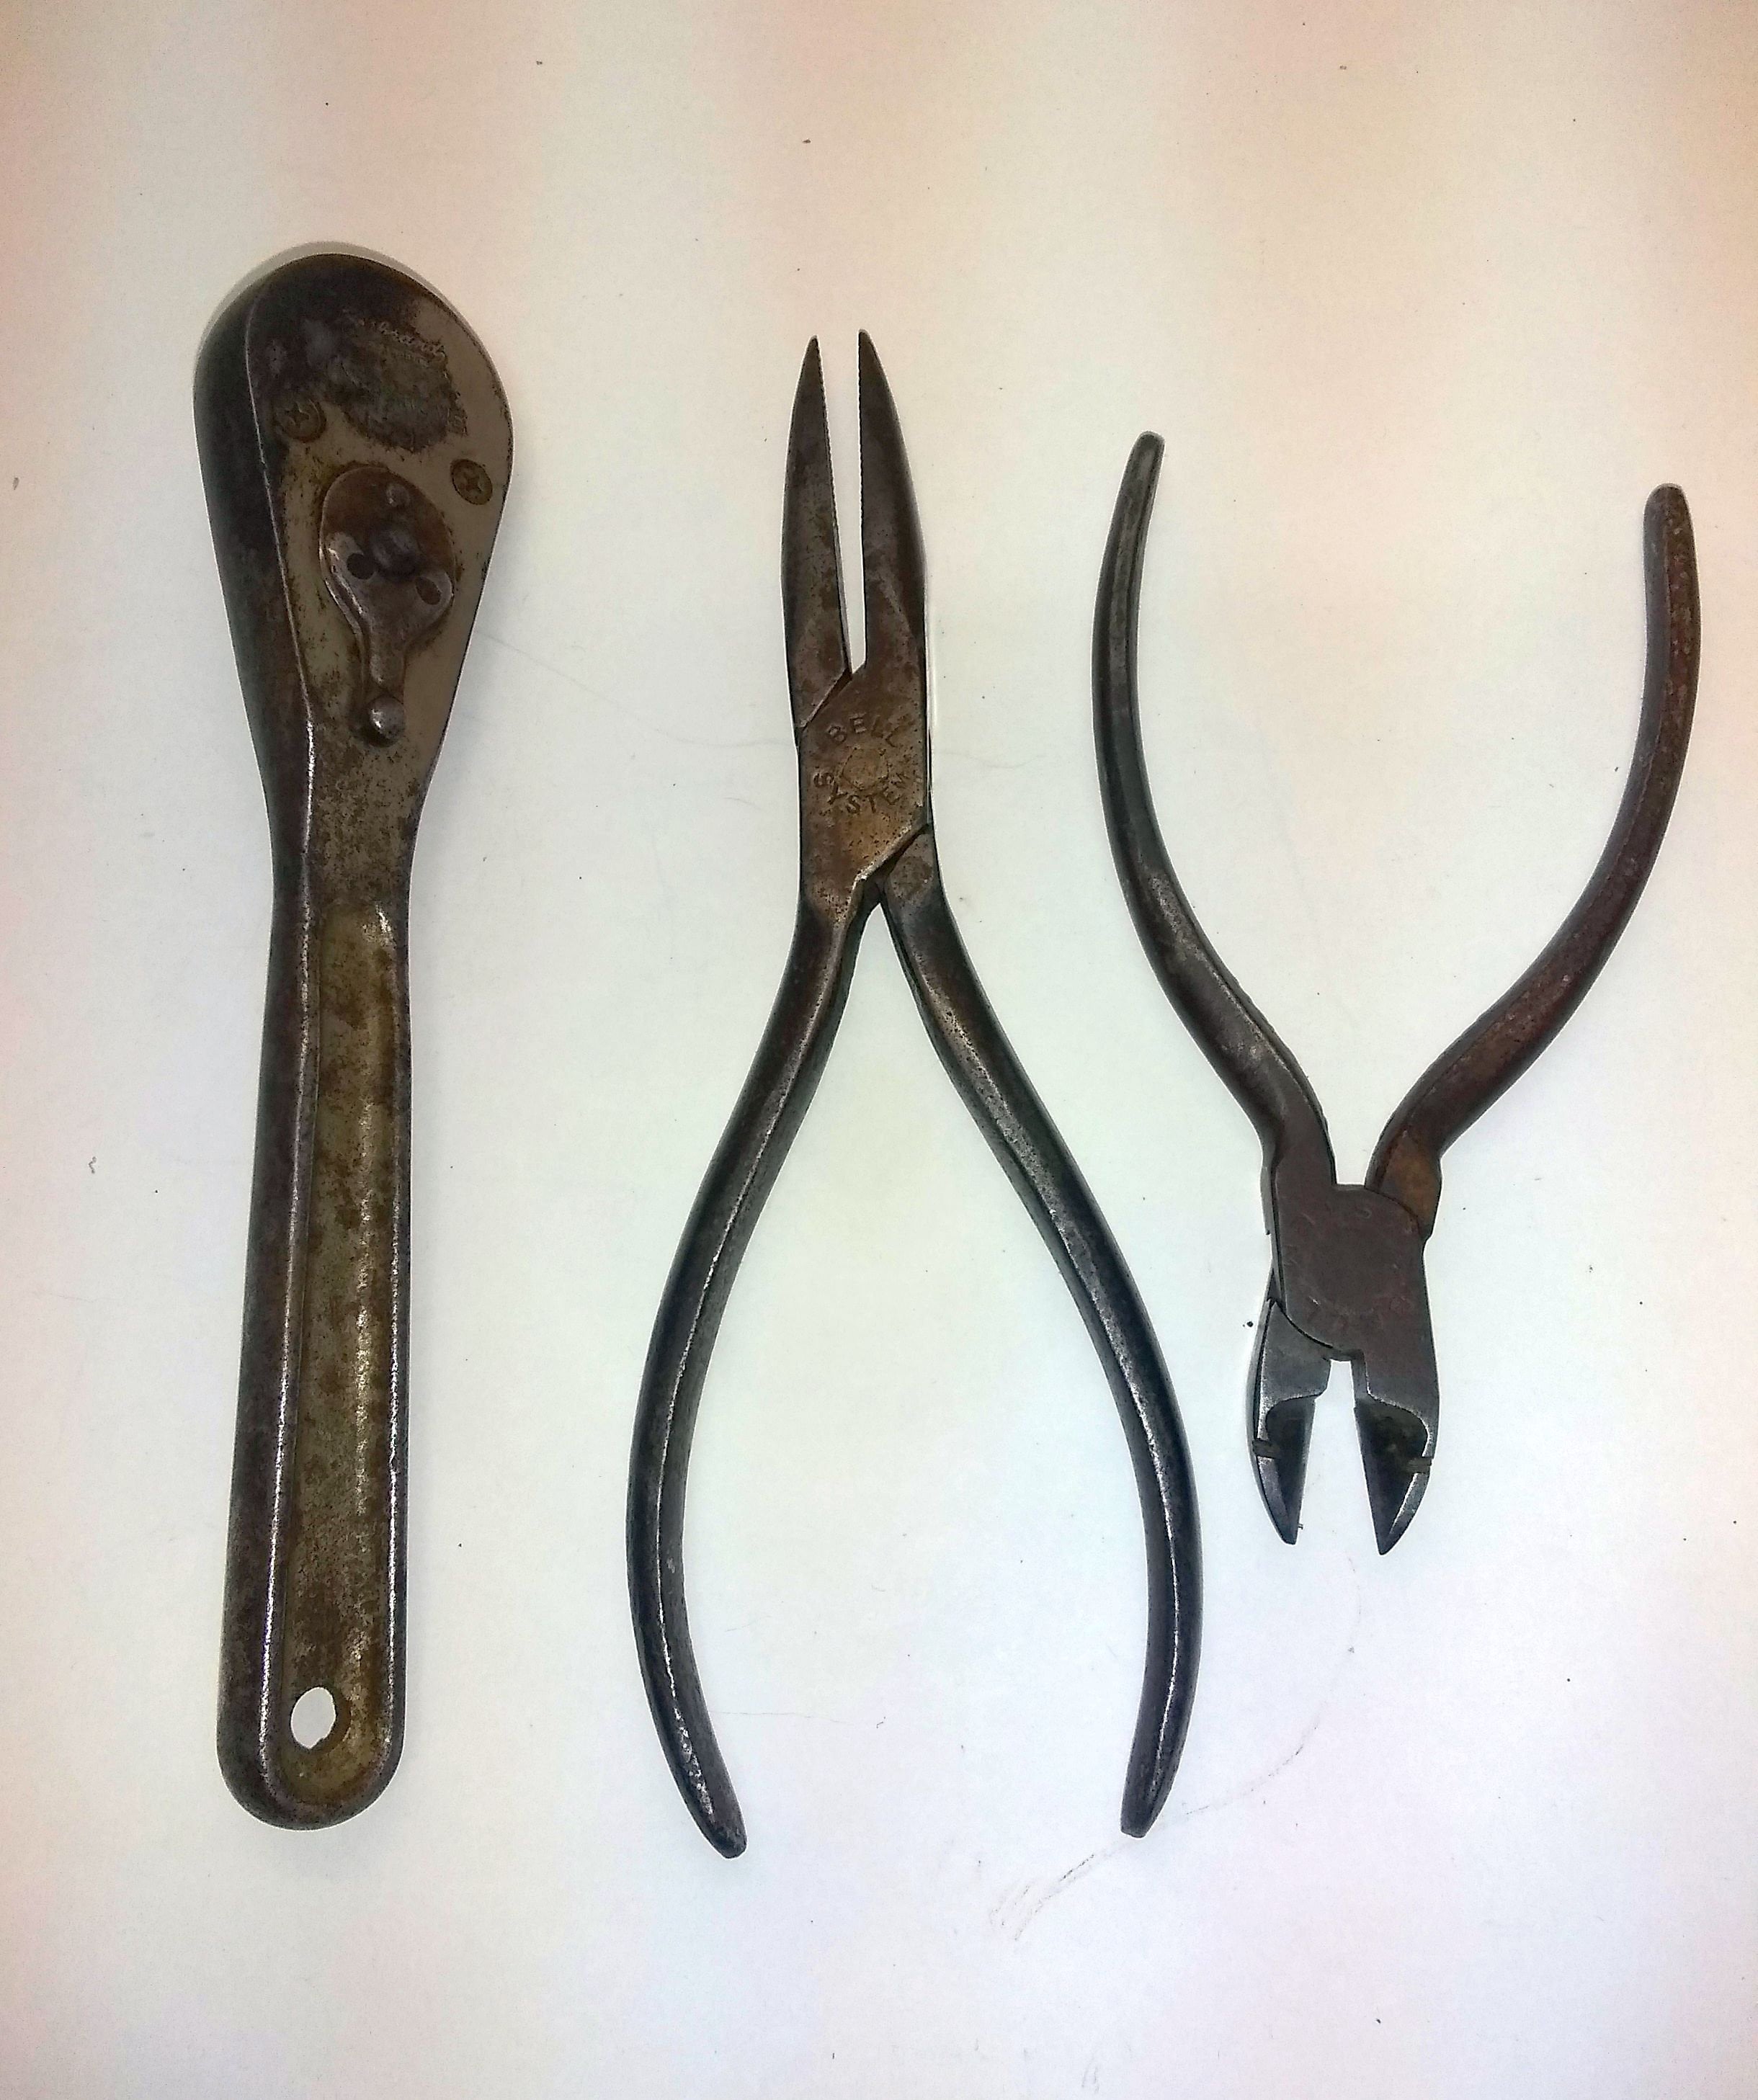 Tiny unmarked watchmaker's hammer – Working Tools: Vintage and